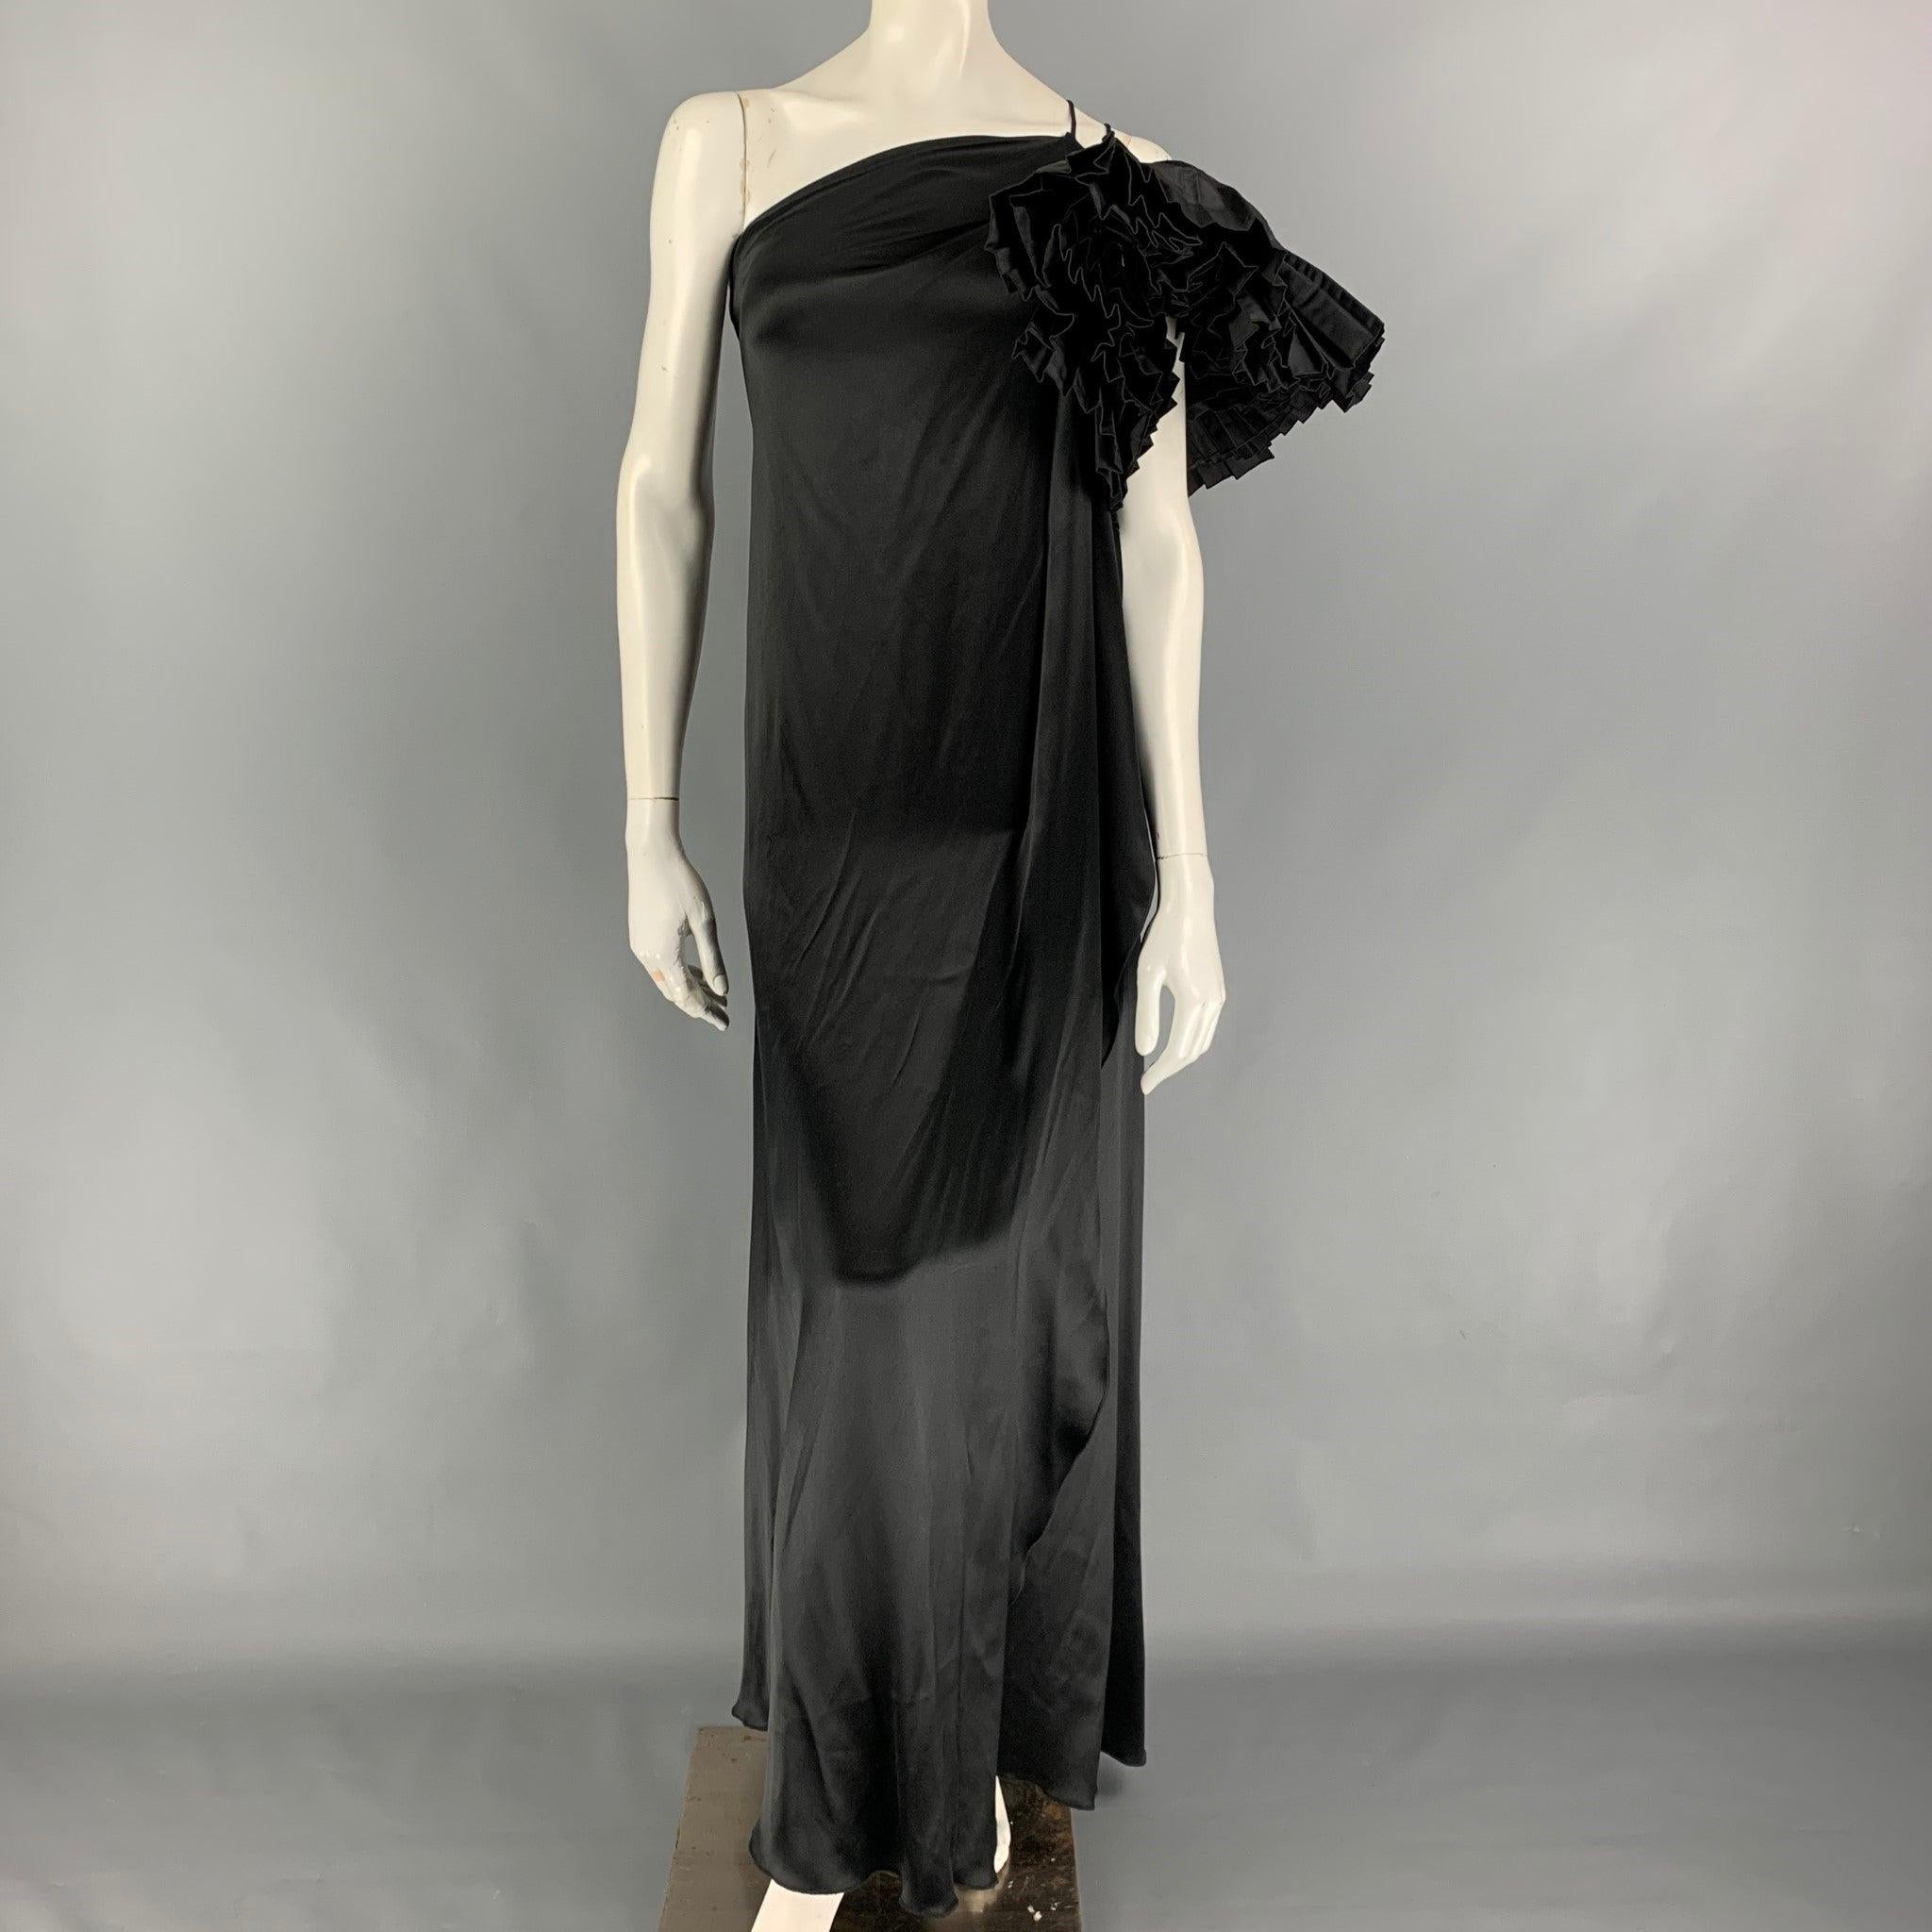 MARC JACOBS gown comes in a black silk featuring an asymmetrical style, double strap details, and a ruffle sleeve design. Made in USA. Very Good
Pre-Owned Condition. 

Marked:  0 

Measurements: 
 Bust: 28 inches Hip: 34 inches Length: 55 inches 
 
